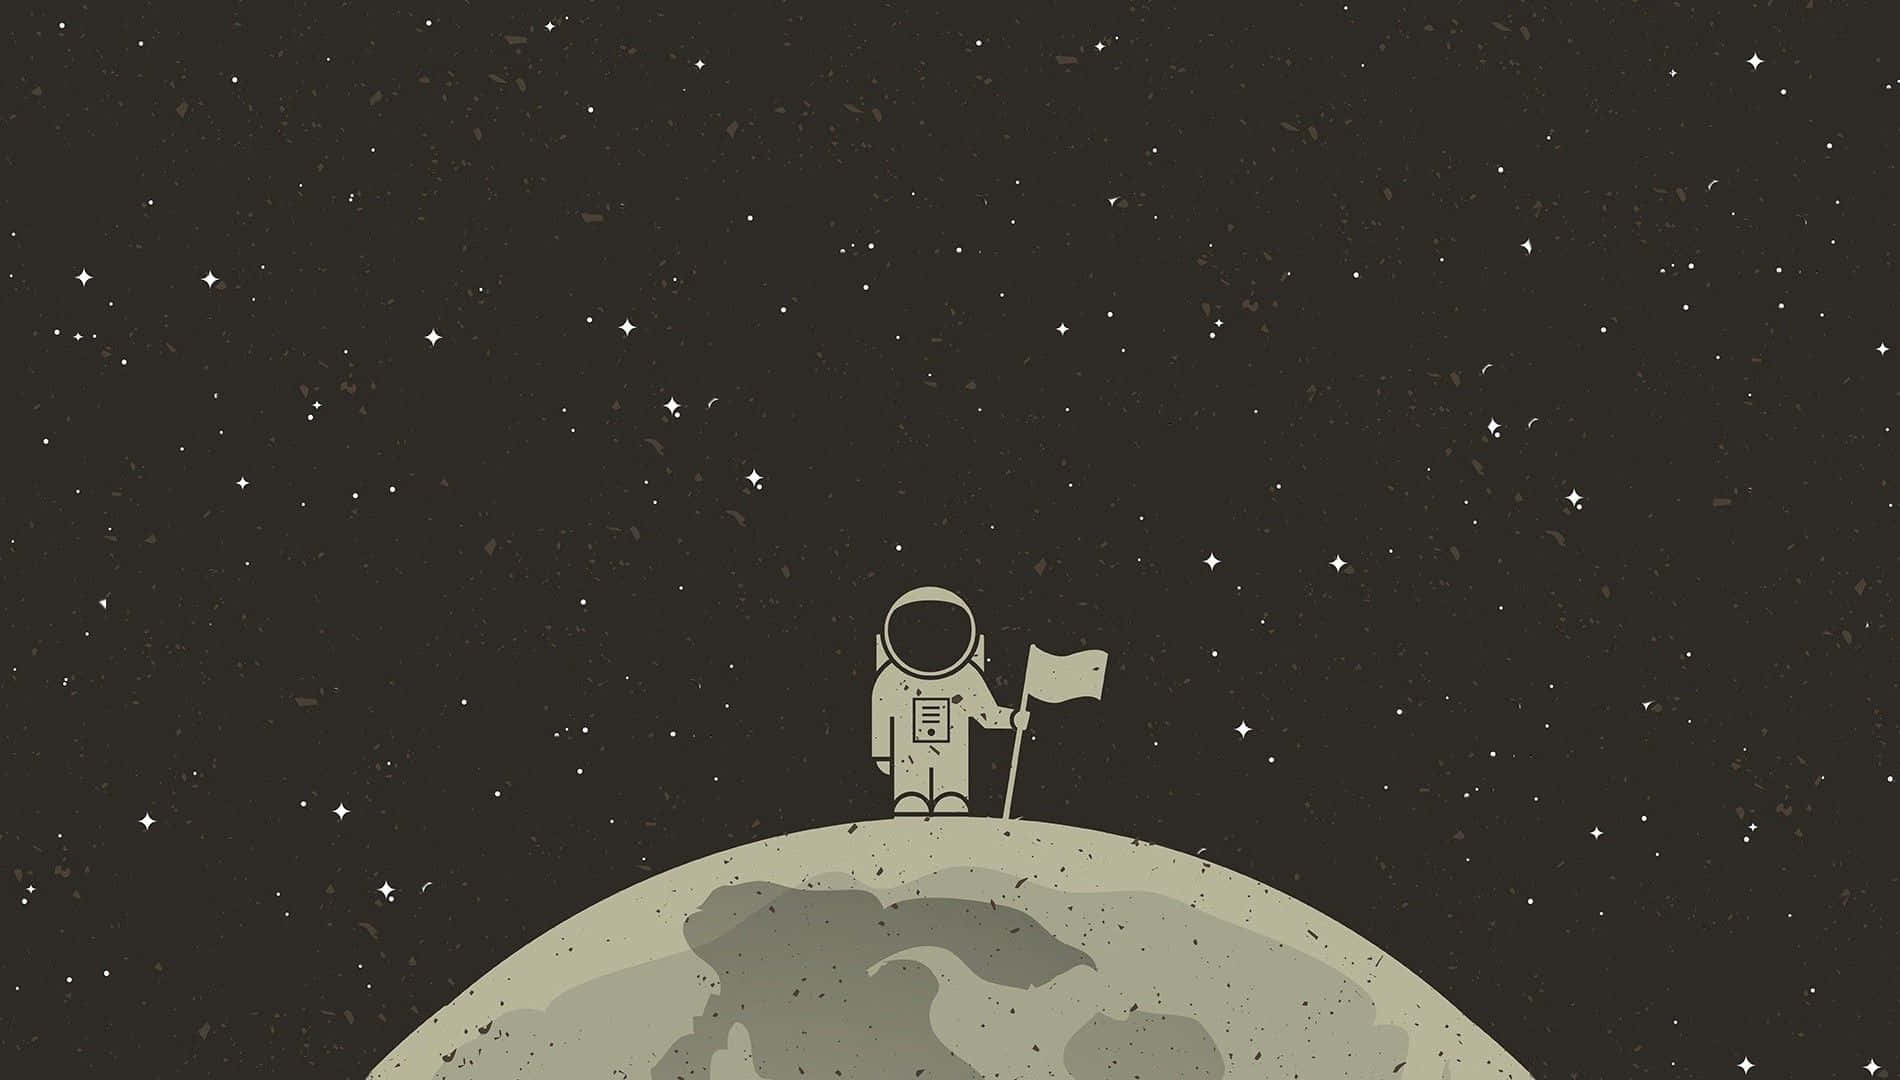 Explore The World Beyond With This Cute Astronaut And His Space Adventure. Wallpaper